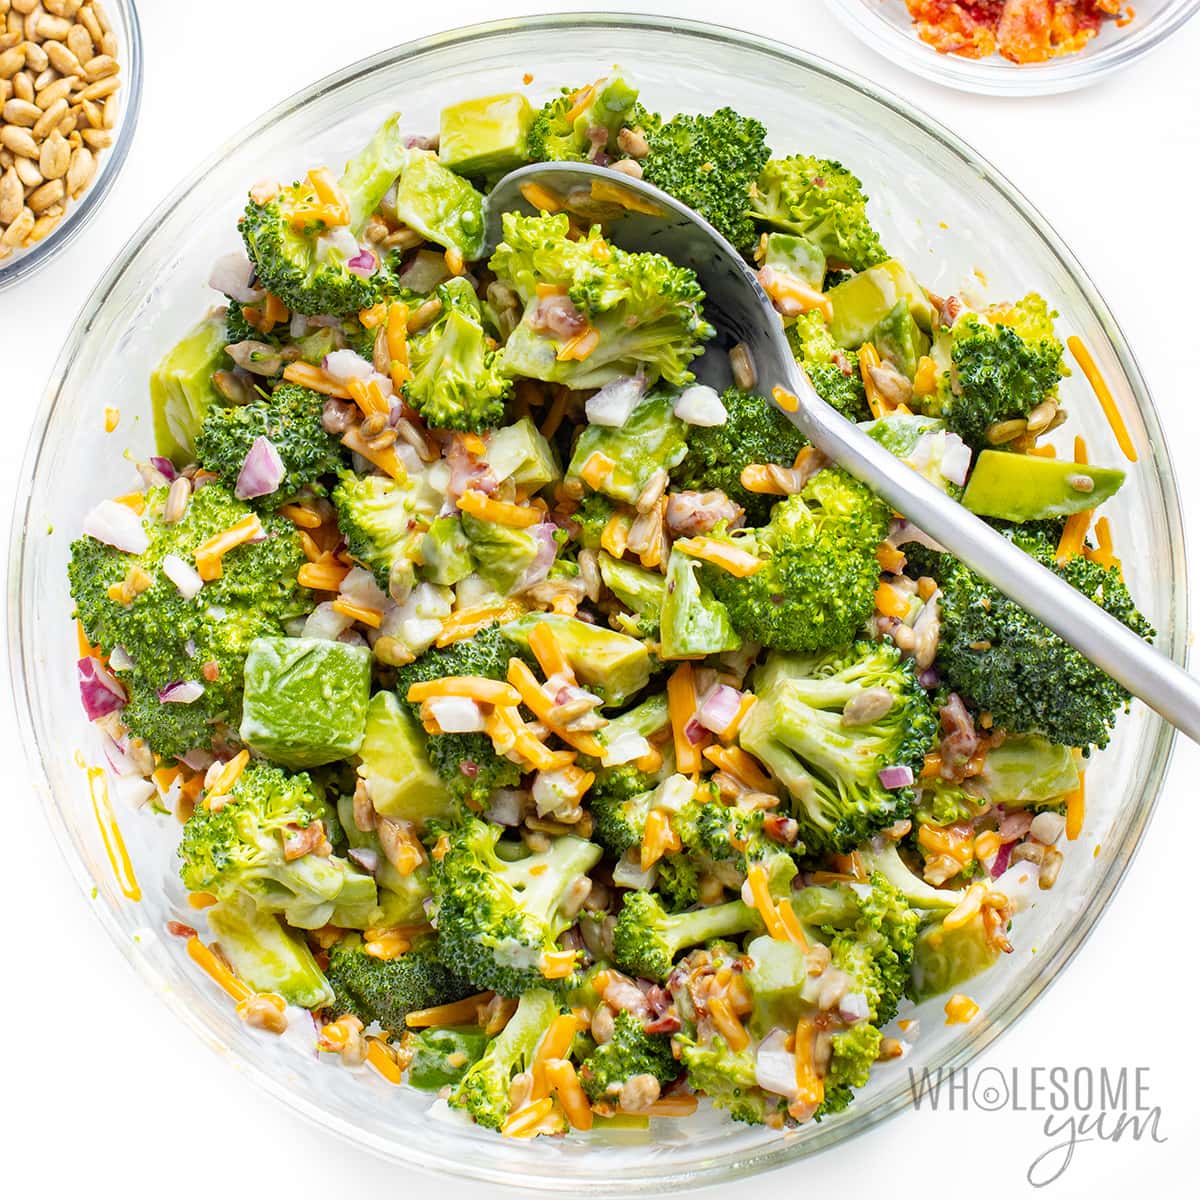 Bacon broccoli salad mixed together in a bowl.